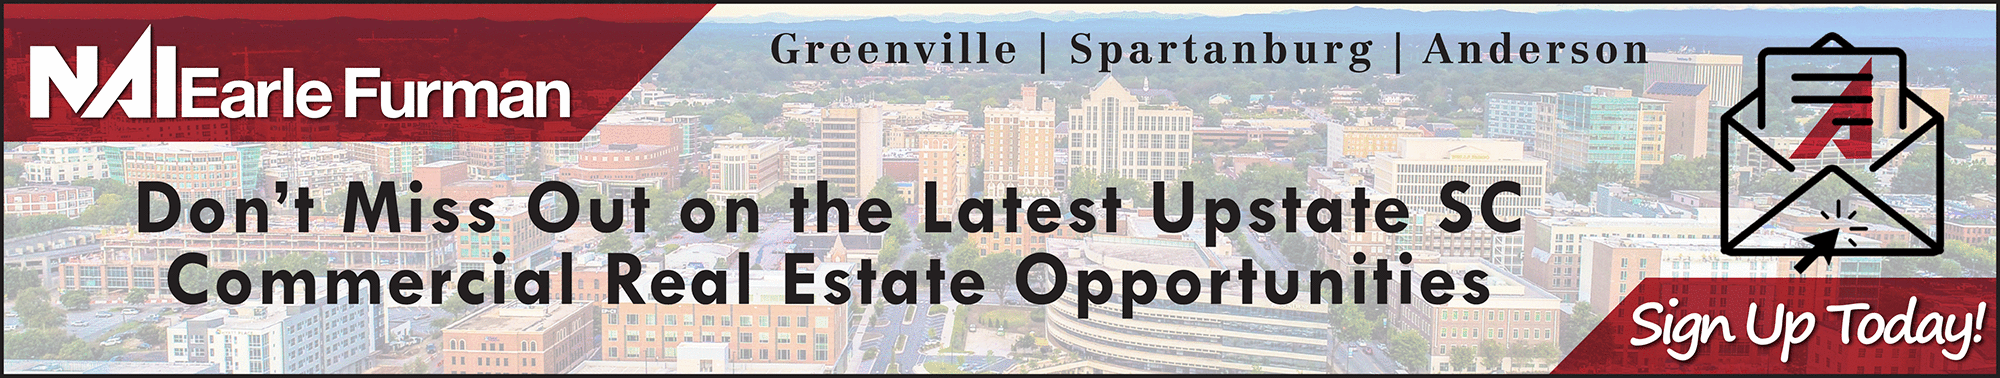 Ad: NAI Earle Furman: Don't miss out on the latest Upstate commercial real estate opportunities